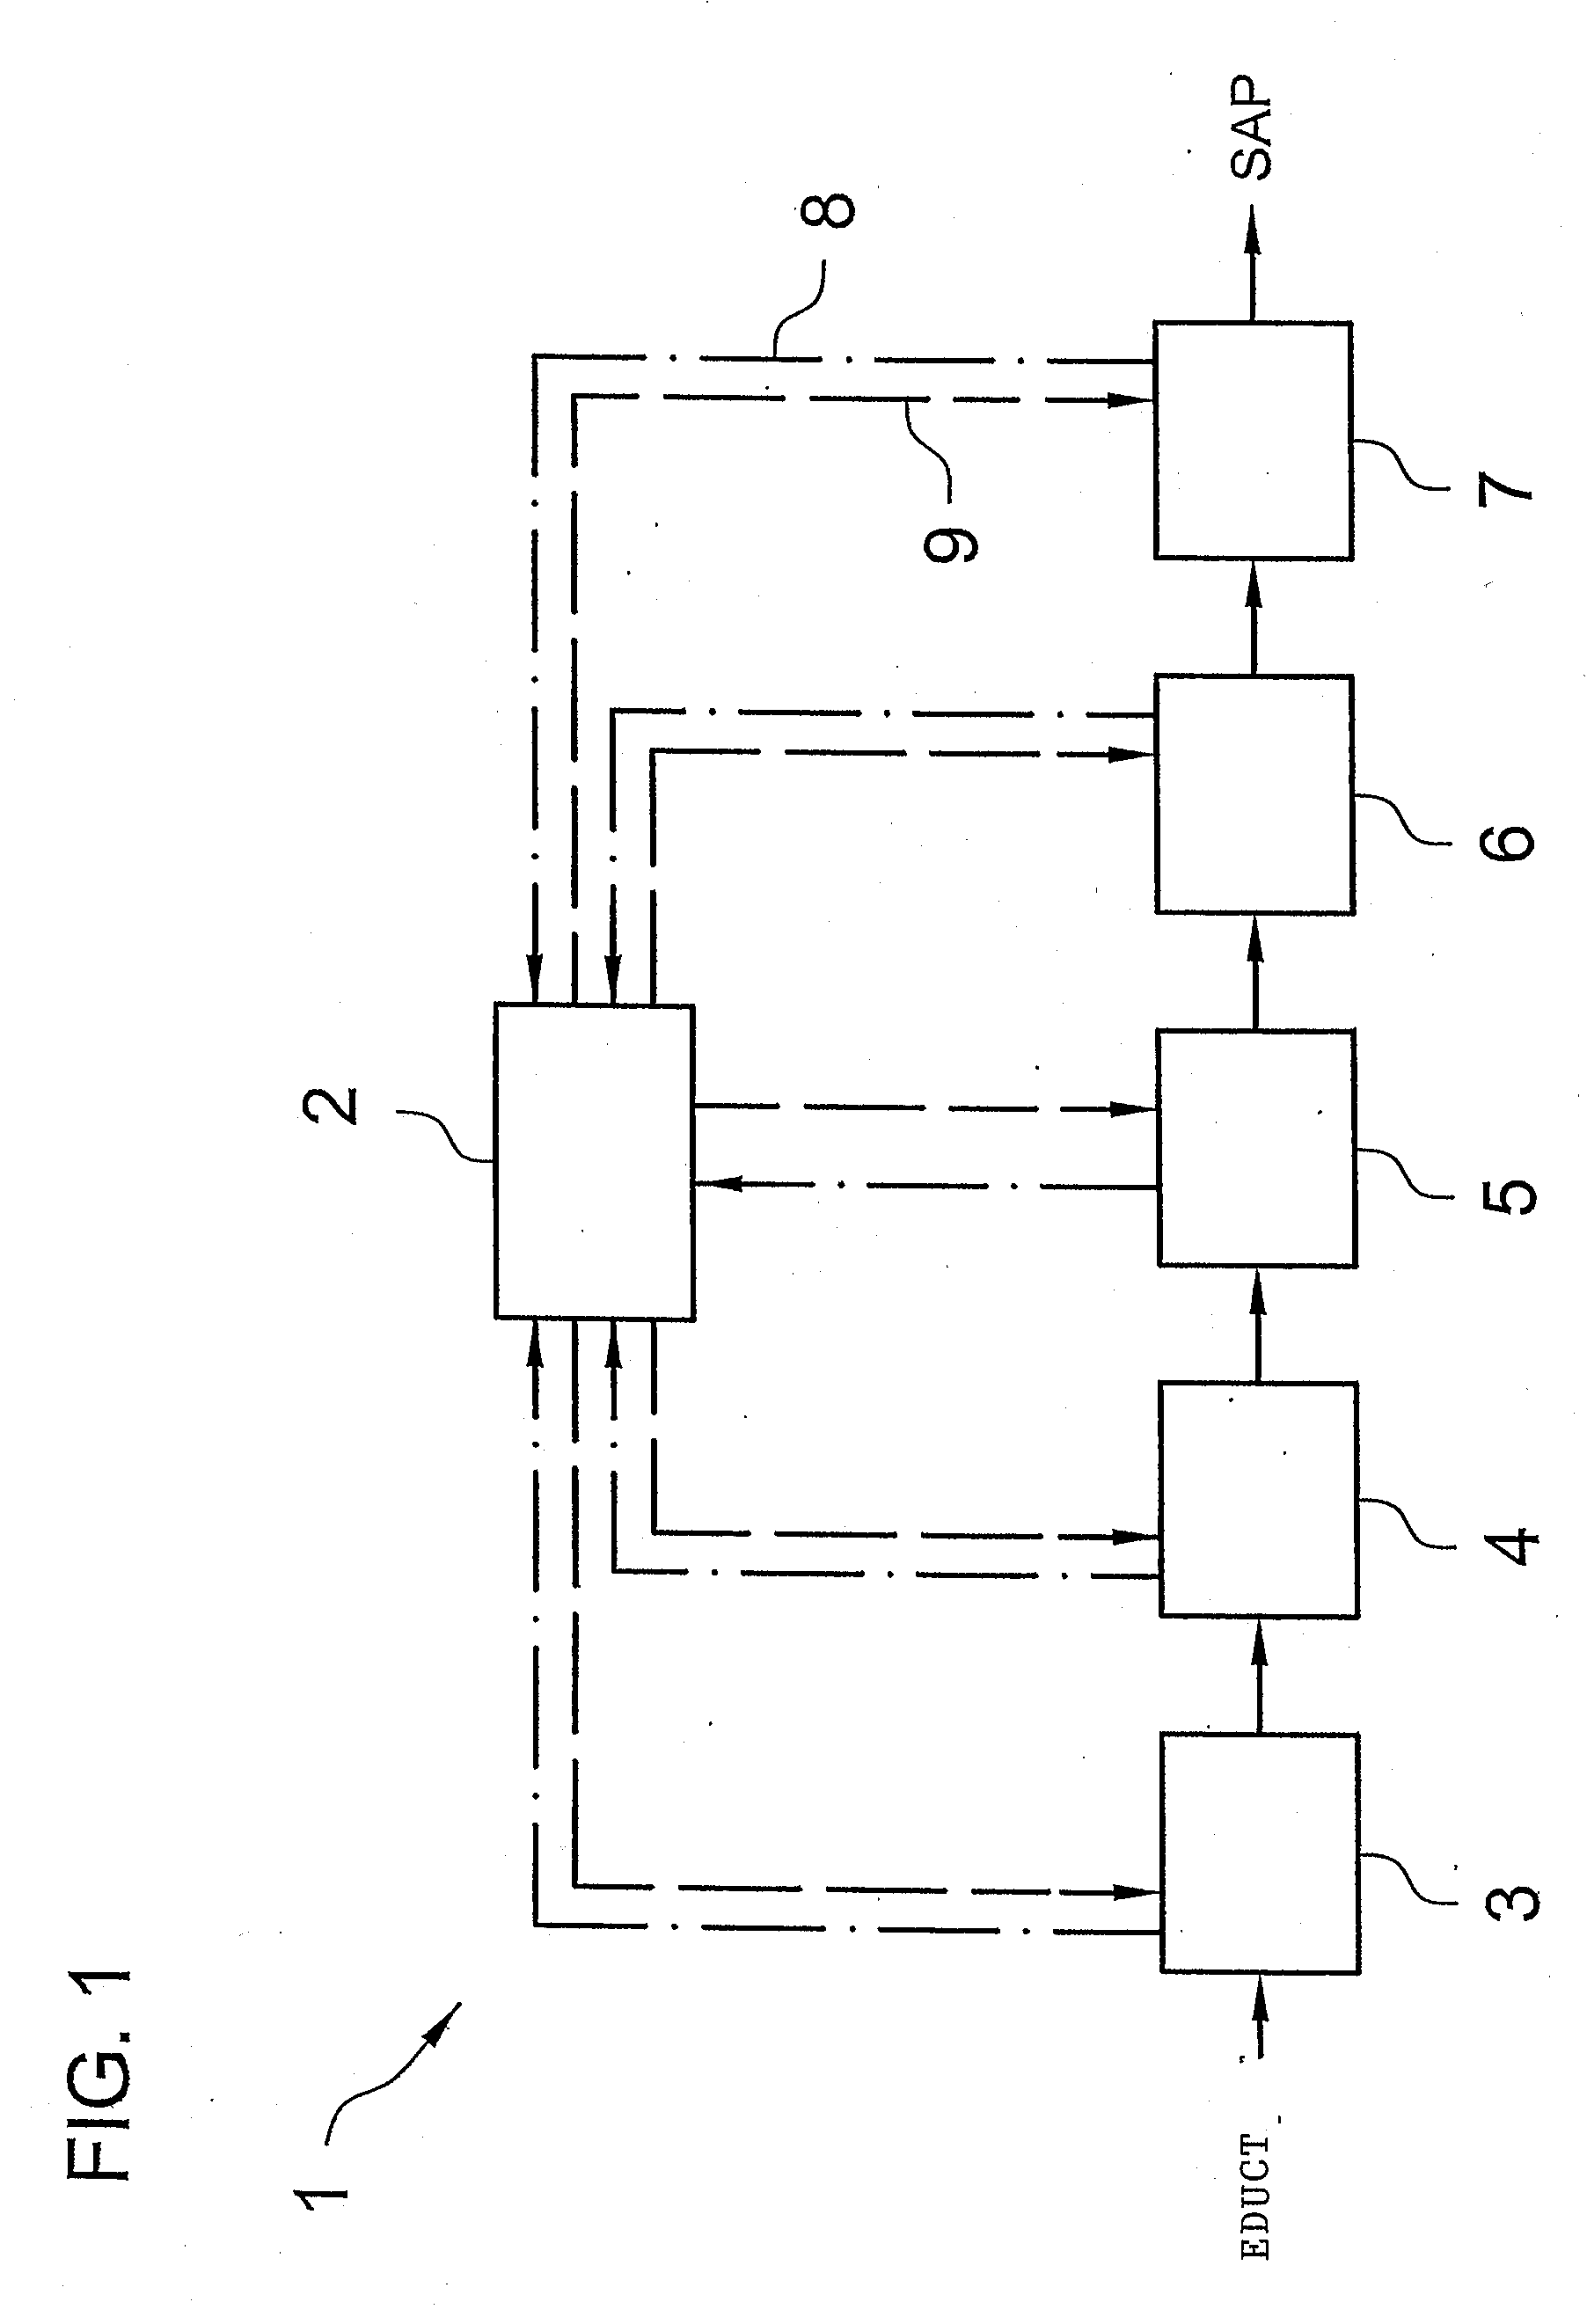 Method for the Production of Hydrophilic Polymers and Finishing Products Containing the Same Using a Computer-Generated Model